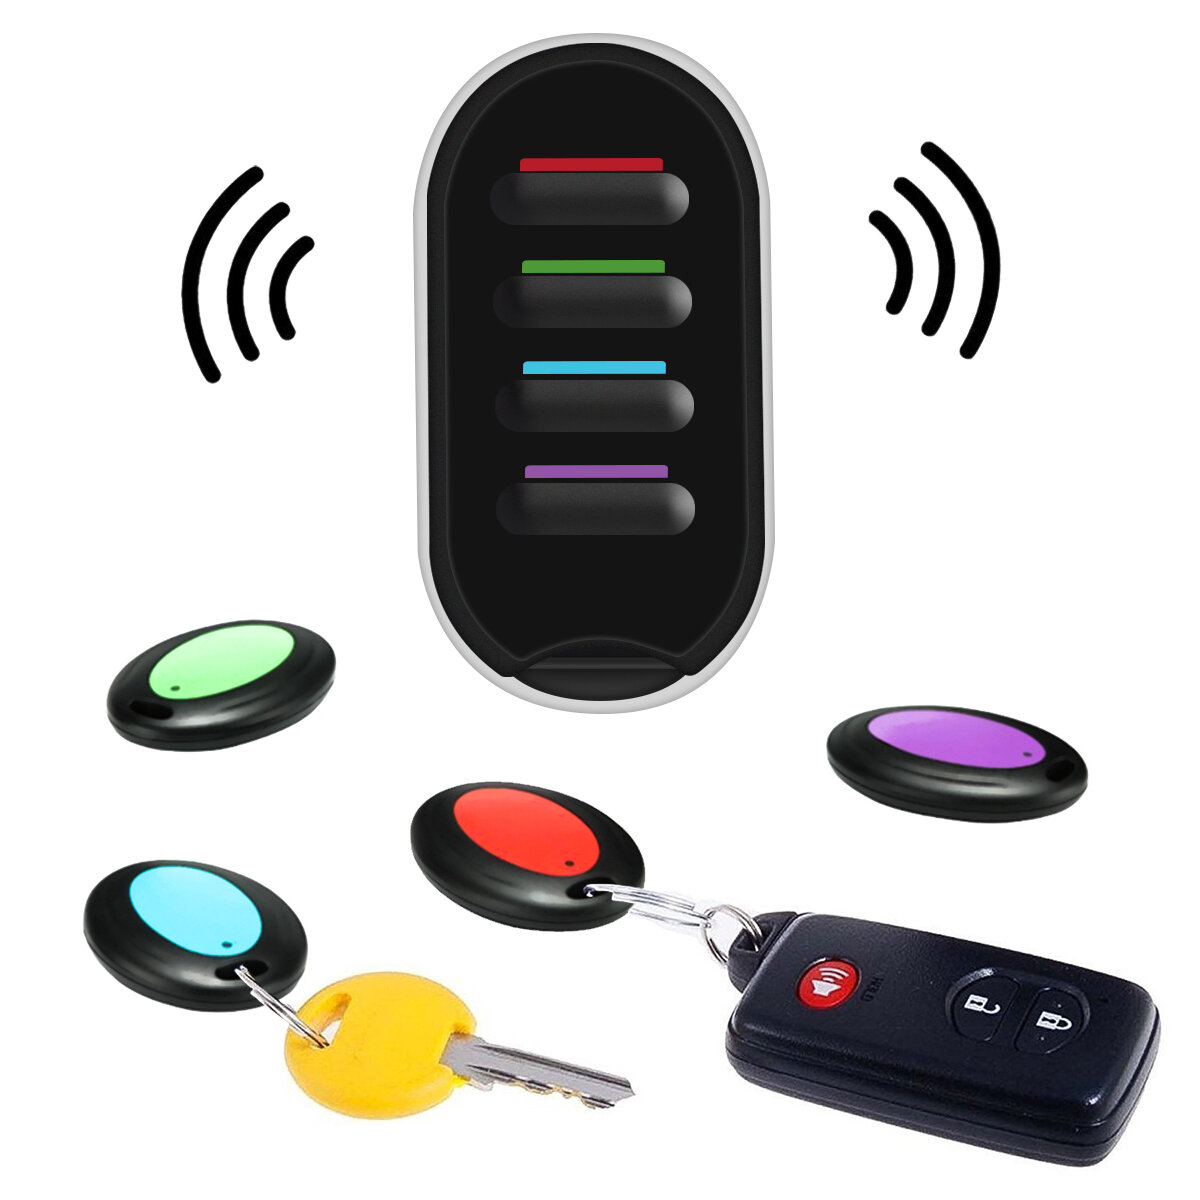 

Hizek 4-IN-1 Anti-Lost Alarm Smart Tag Wireless Tracker Child Wallet Key Finder Locator with LED Flashlight and 4 Receiv